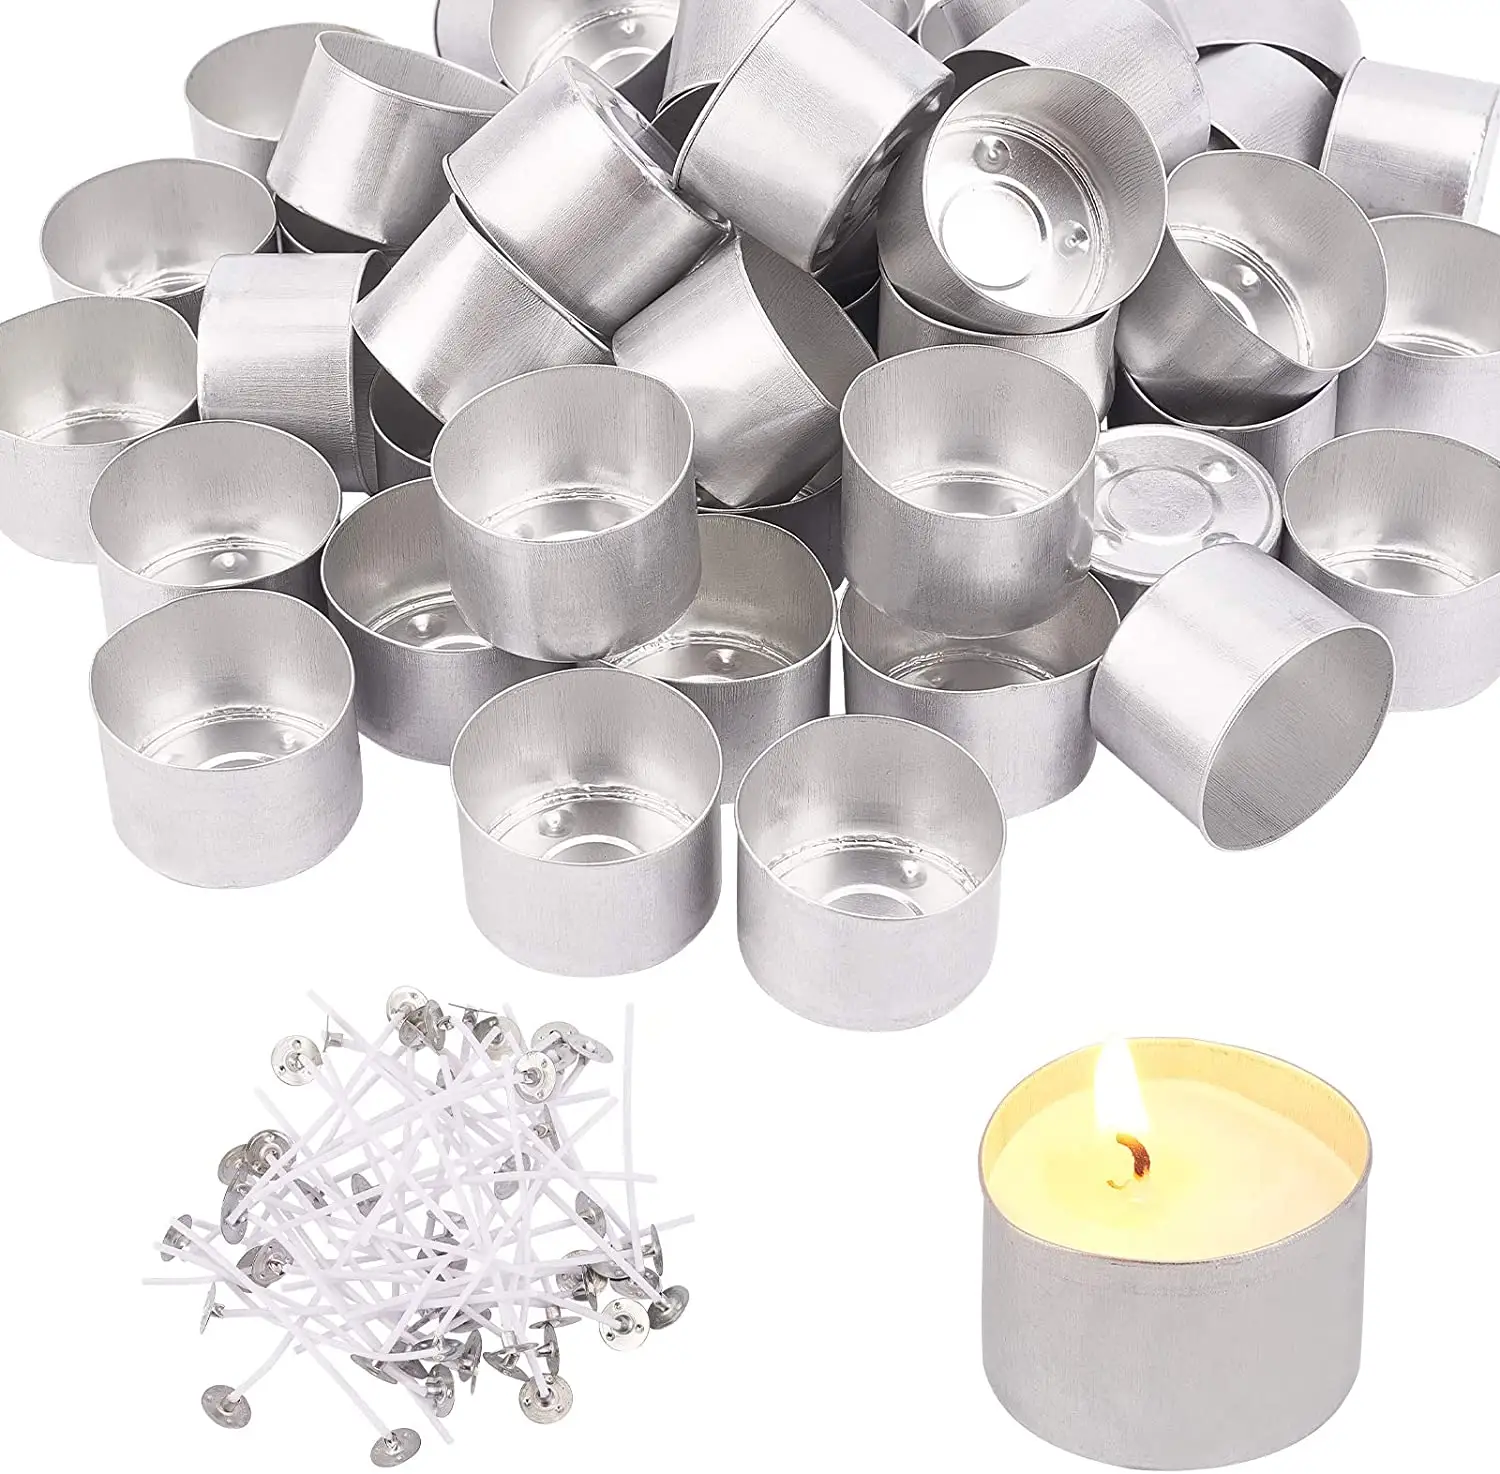 M2191 Candle Mold Empty Aluminum Tealight Cups DIY Candles Tealight Containers Case Candle Making Mold Tools